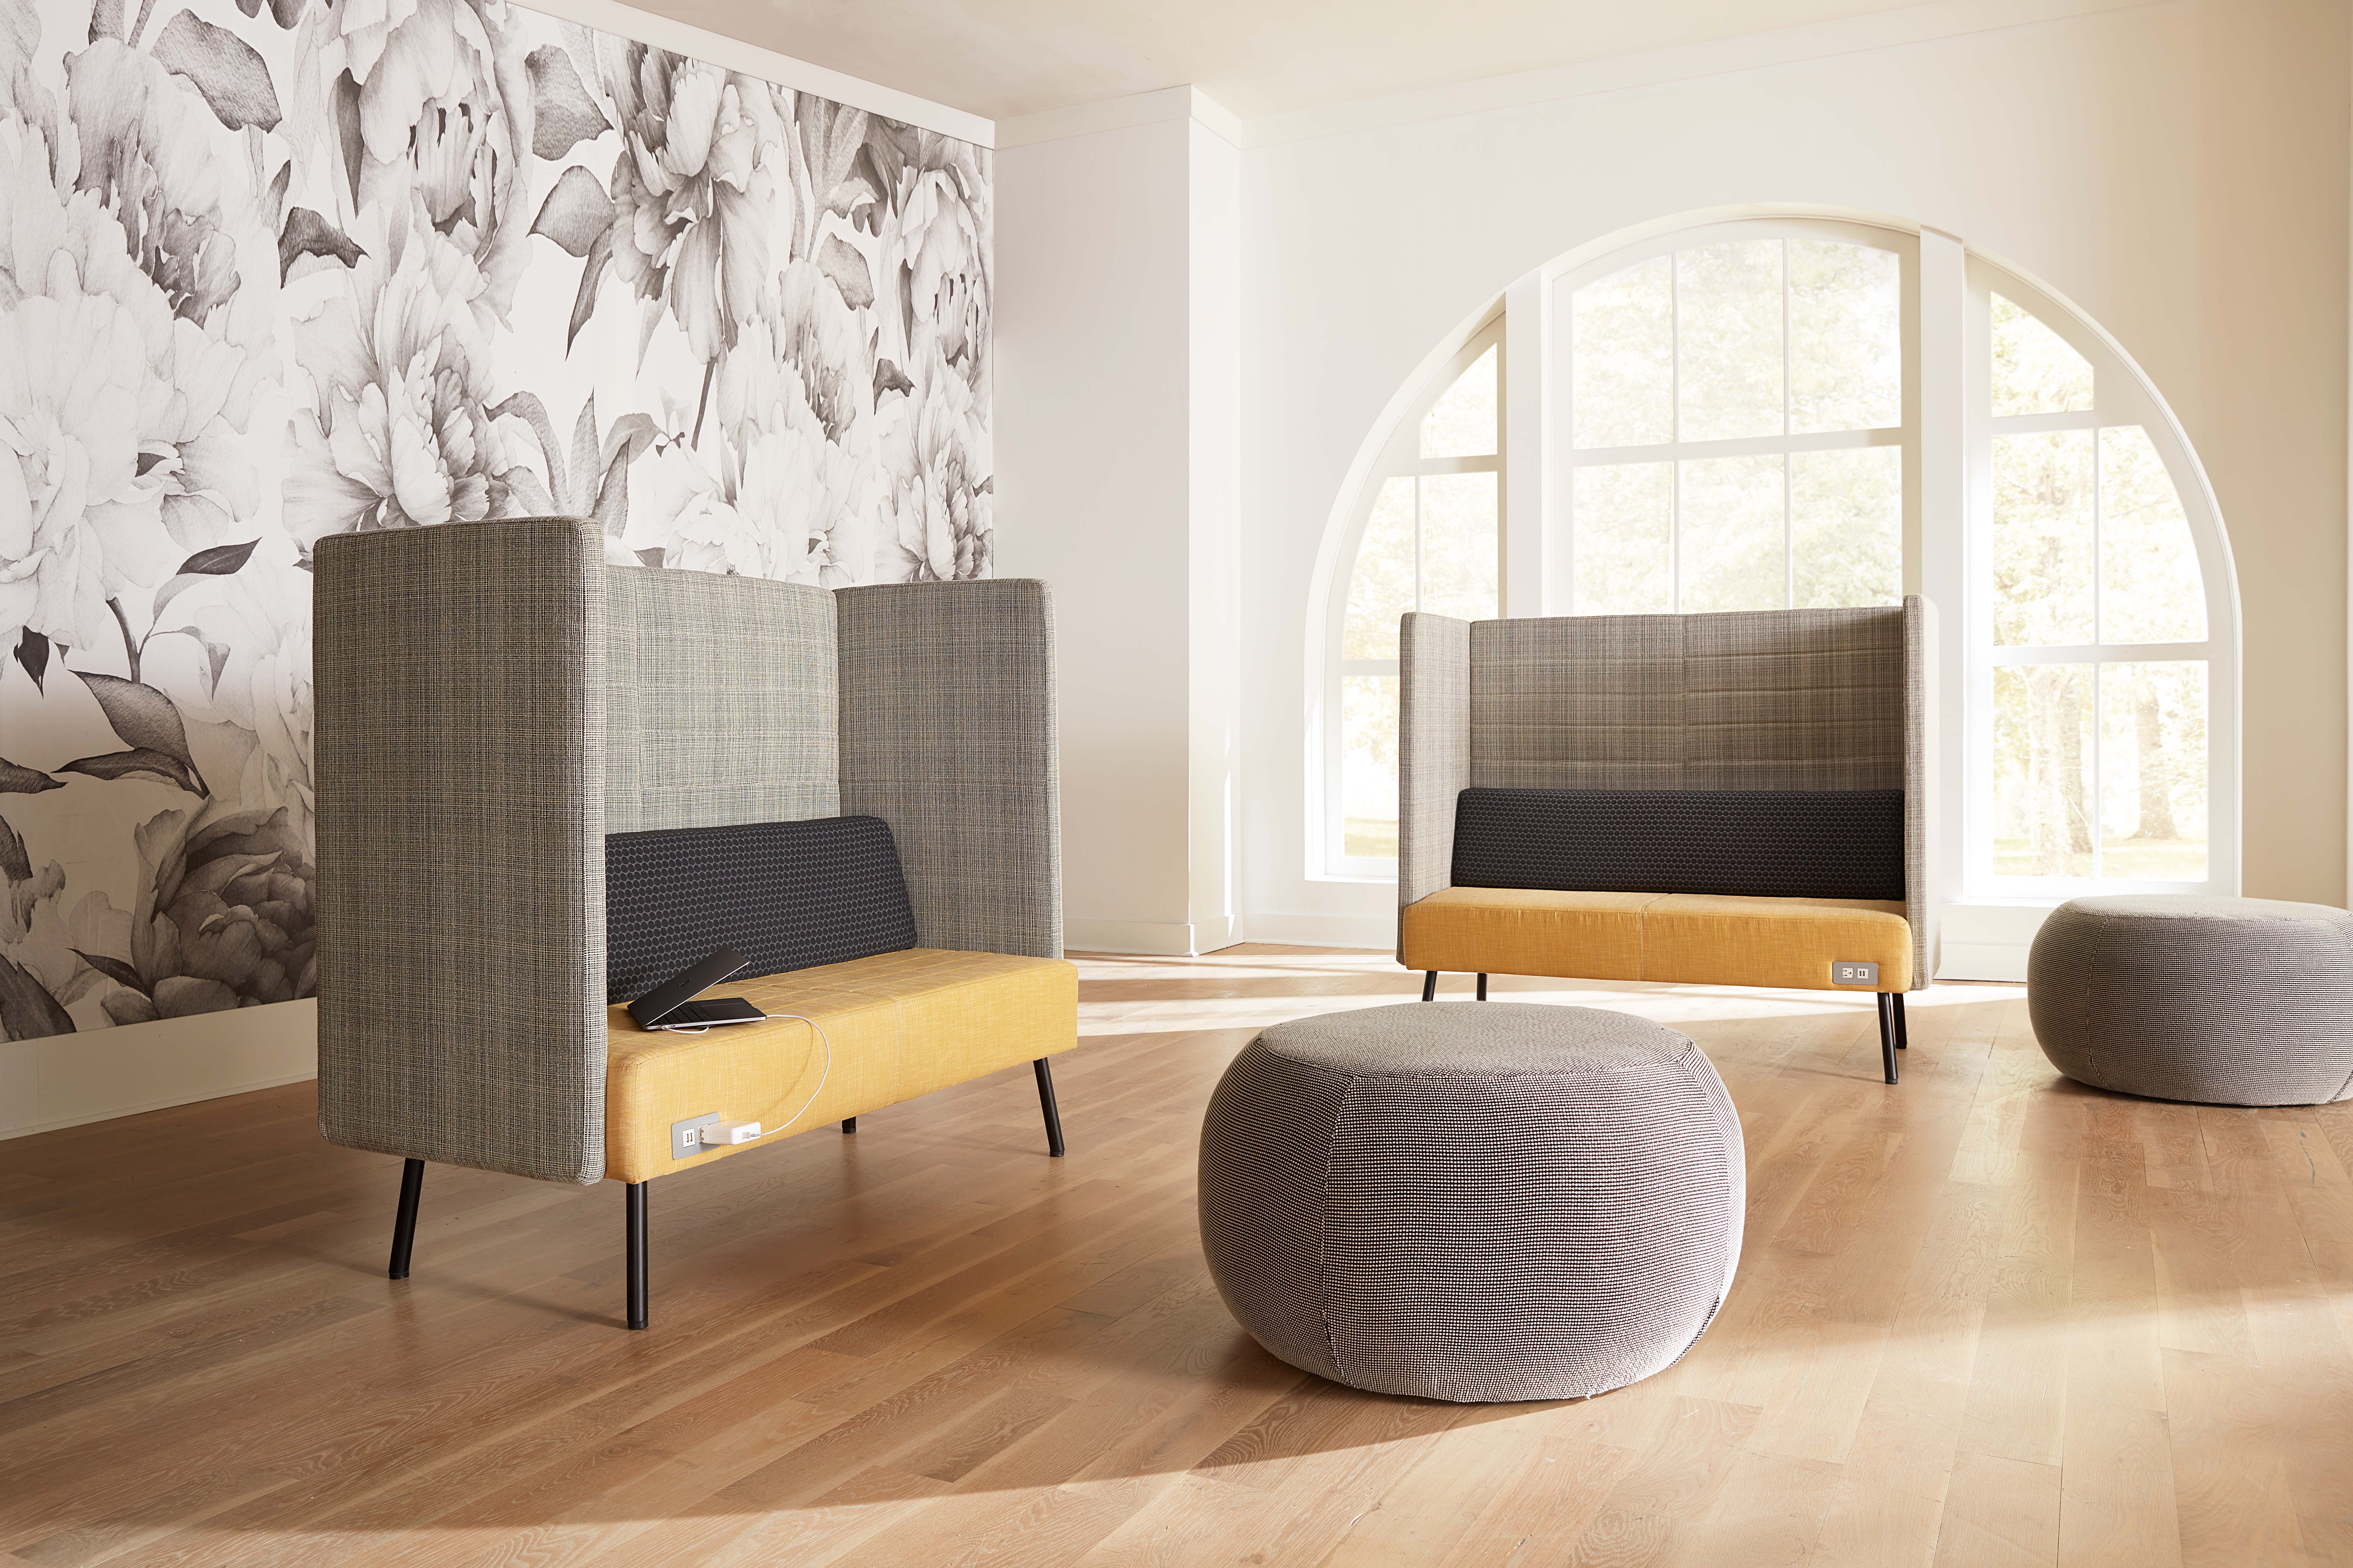 Featuring: Studio 552C High Back 2 Seat Couch, Pouf Point 32, & Pouf Point 50.